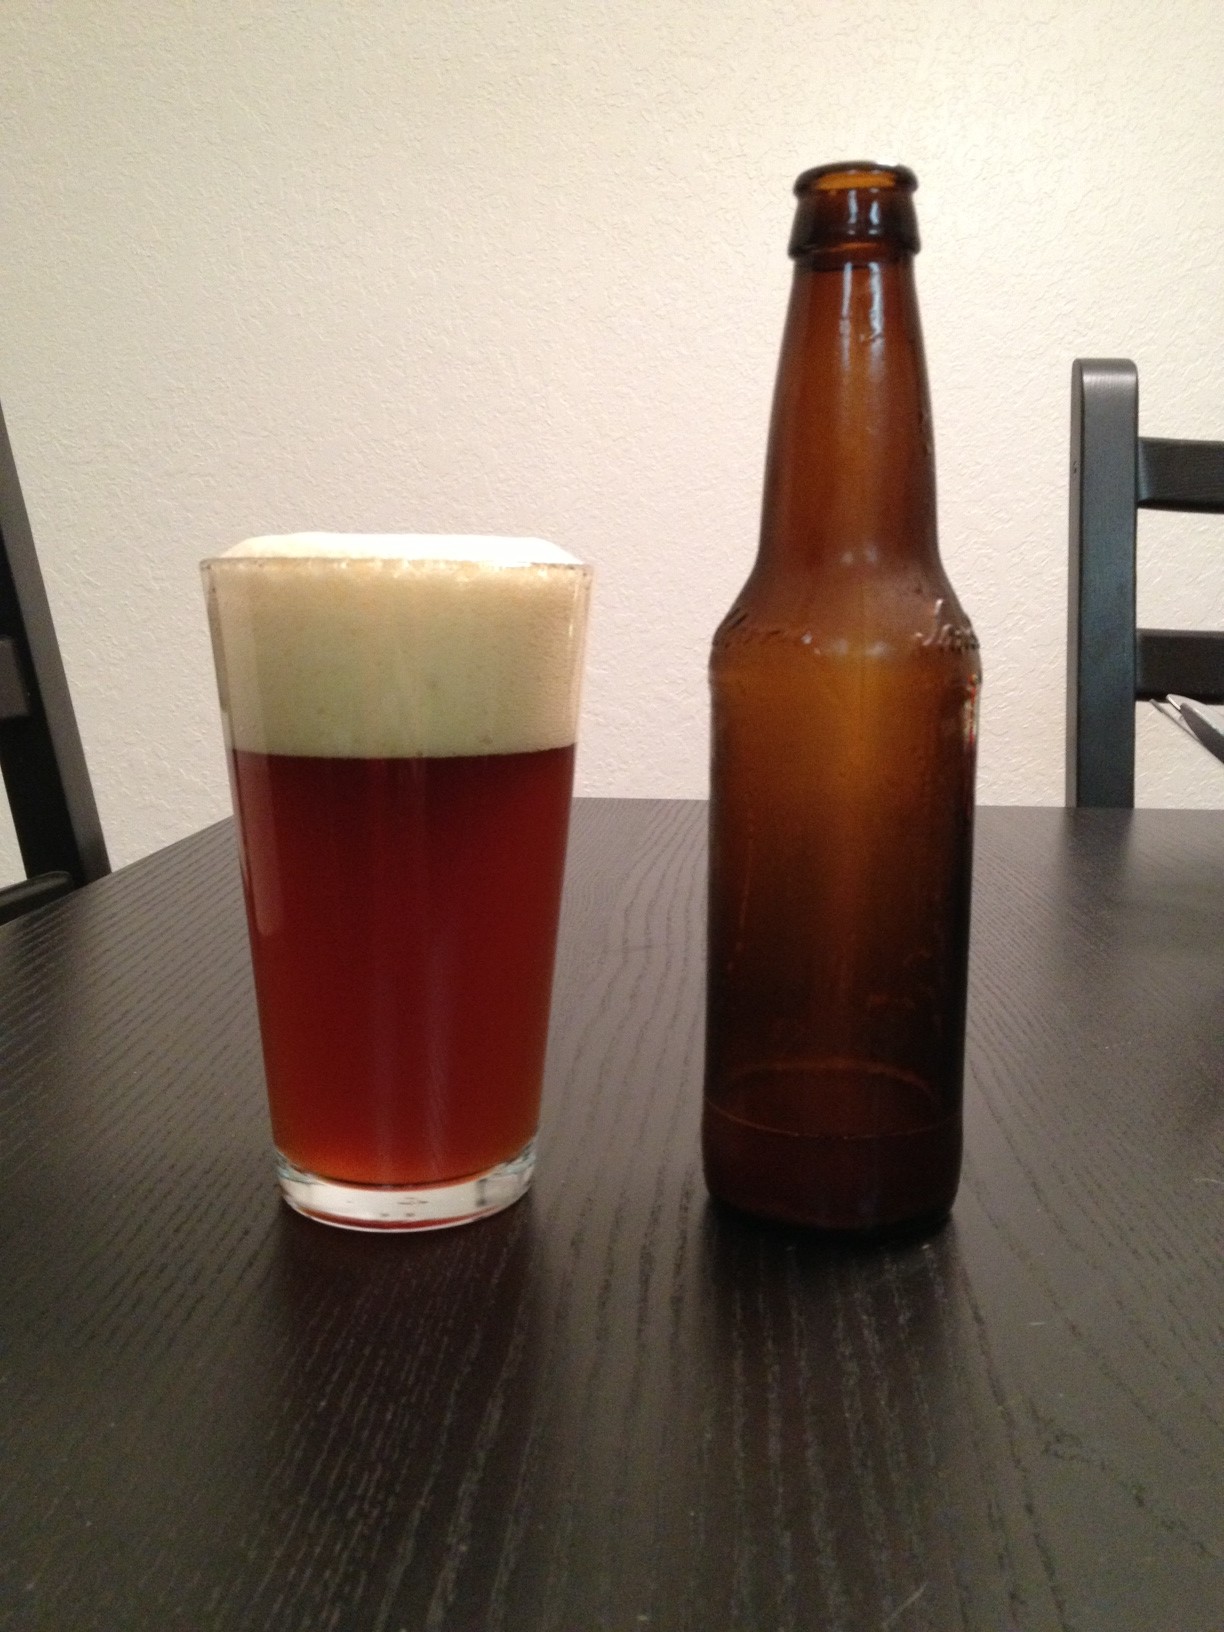 The White House Honey Ale poured into a glass